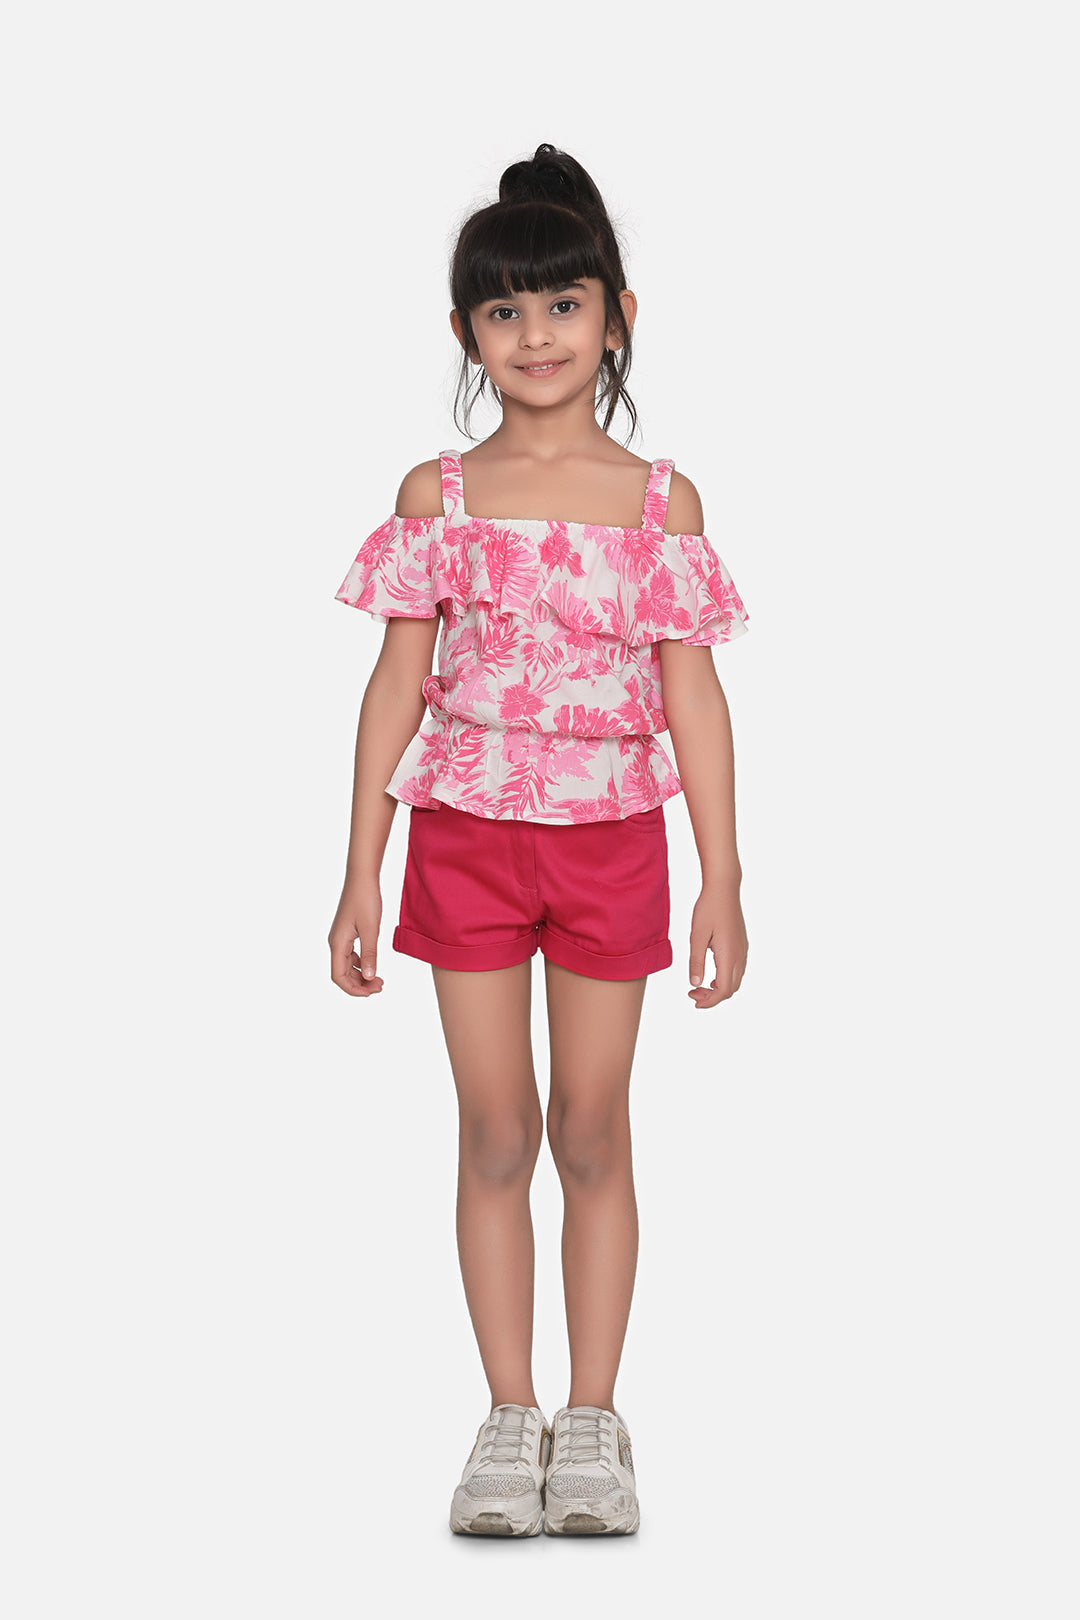 Girl's Rainbow Striped Top With Pink Shorts Set - StyleStone Kid